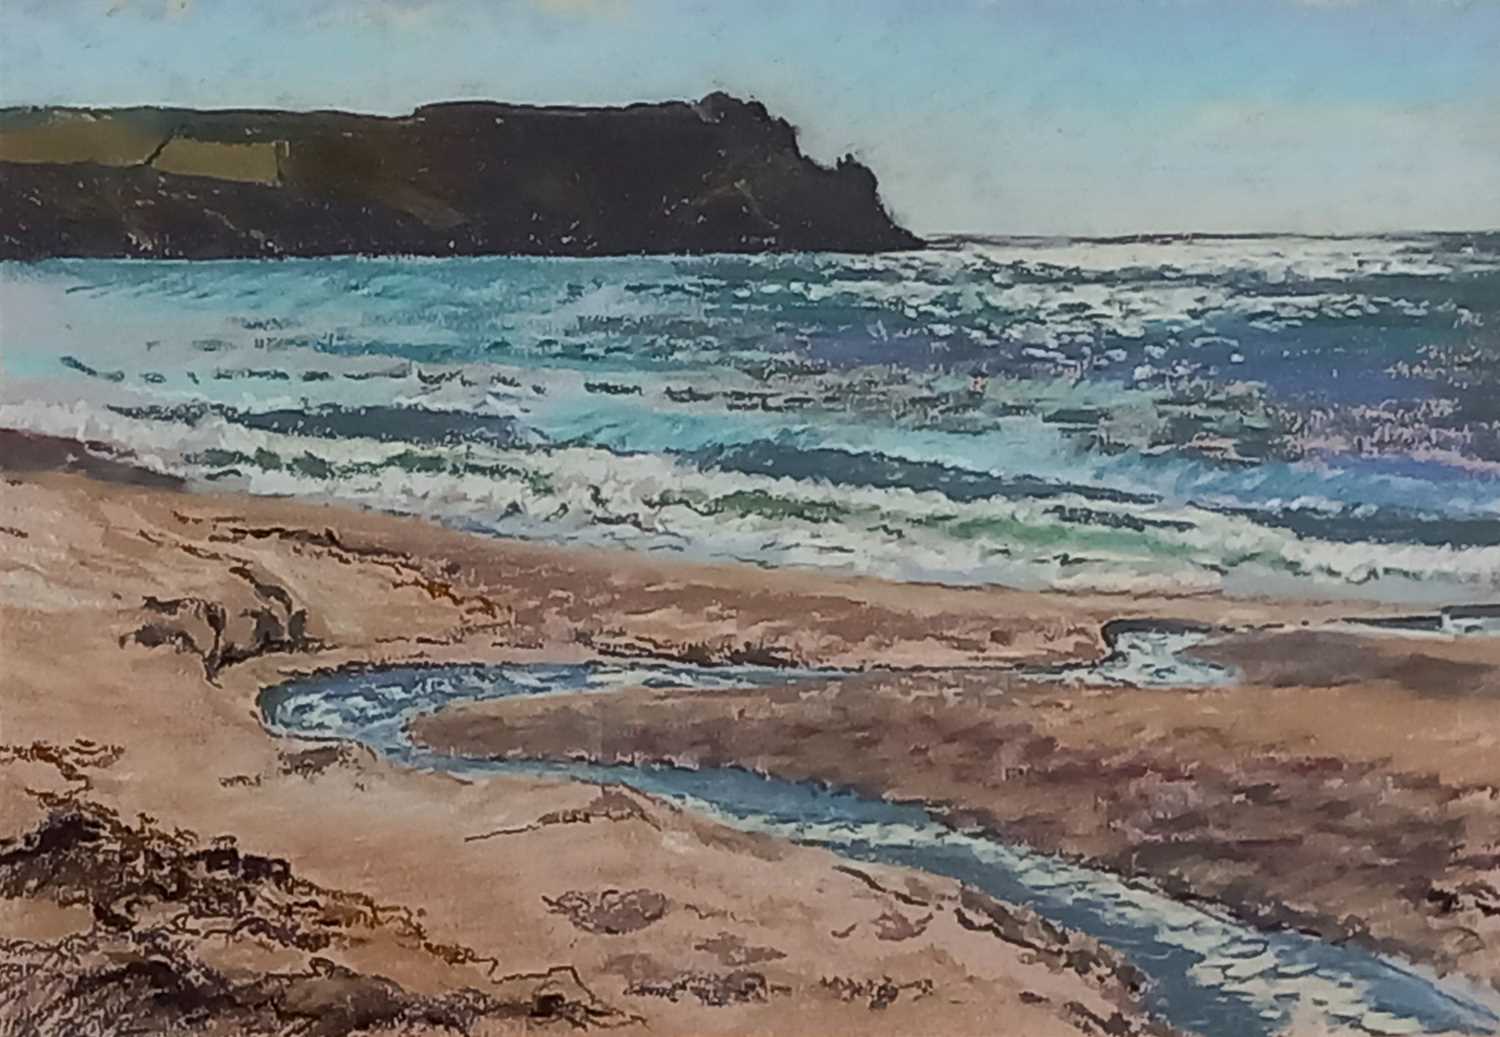 ƚ Gillian SMITH (British 20th / 21st Century) Nare Head from Pendower, Pastel, Signed lower left,